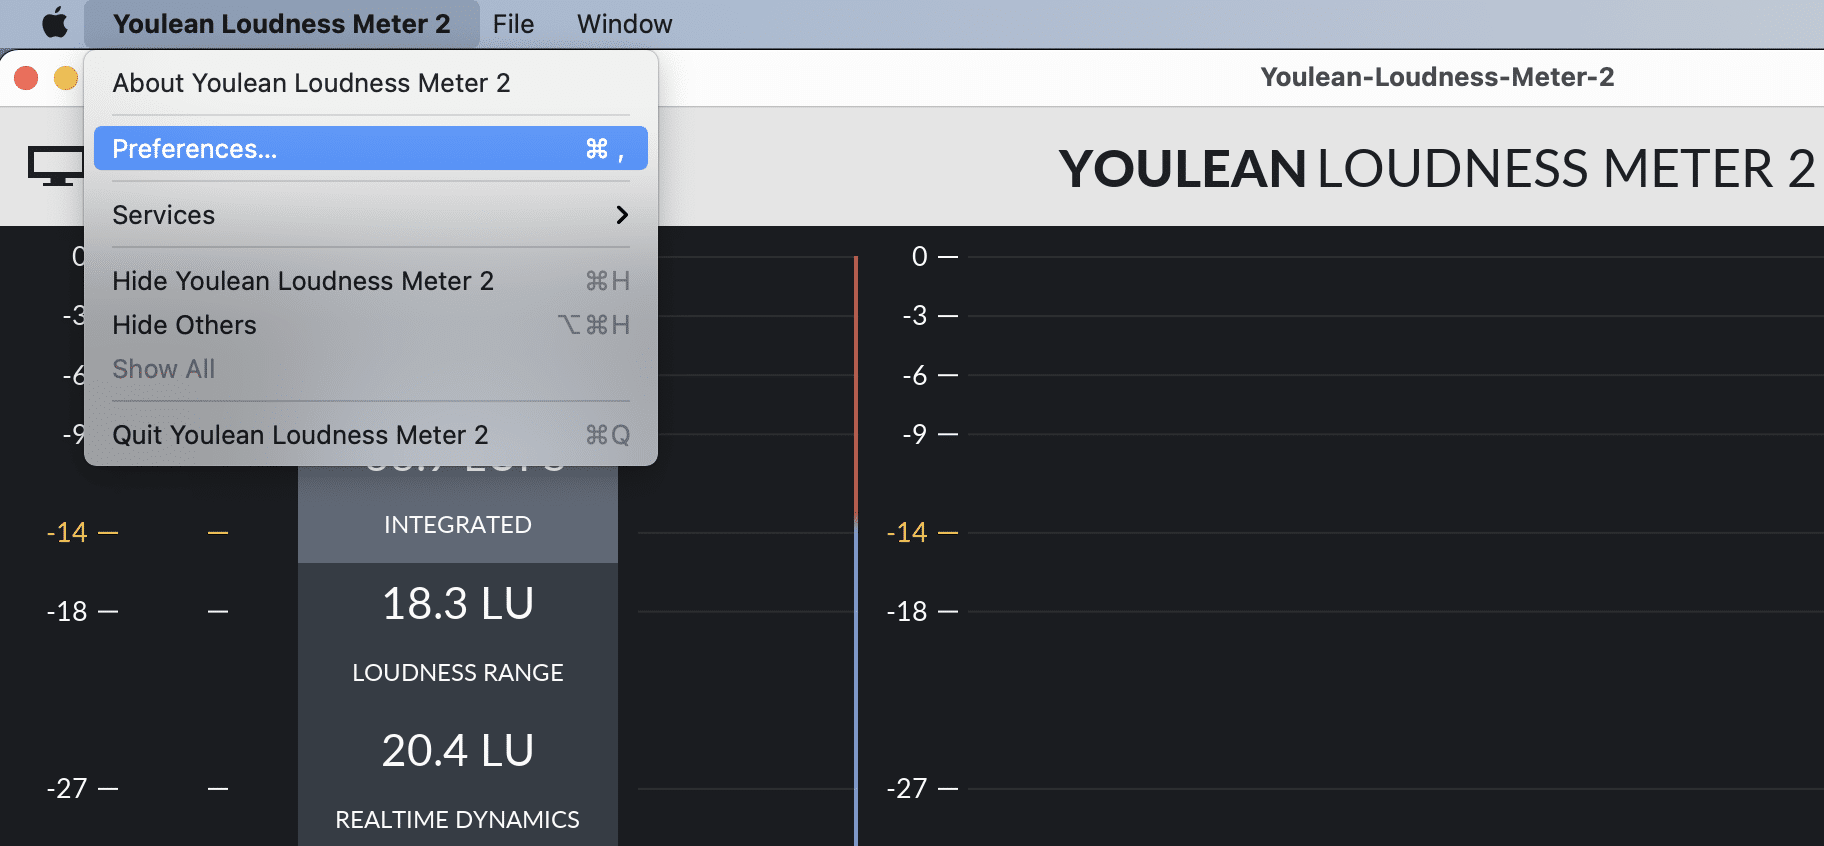 Open Youlean Loudness Meter 2 app preferences